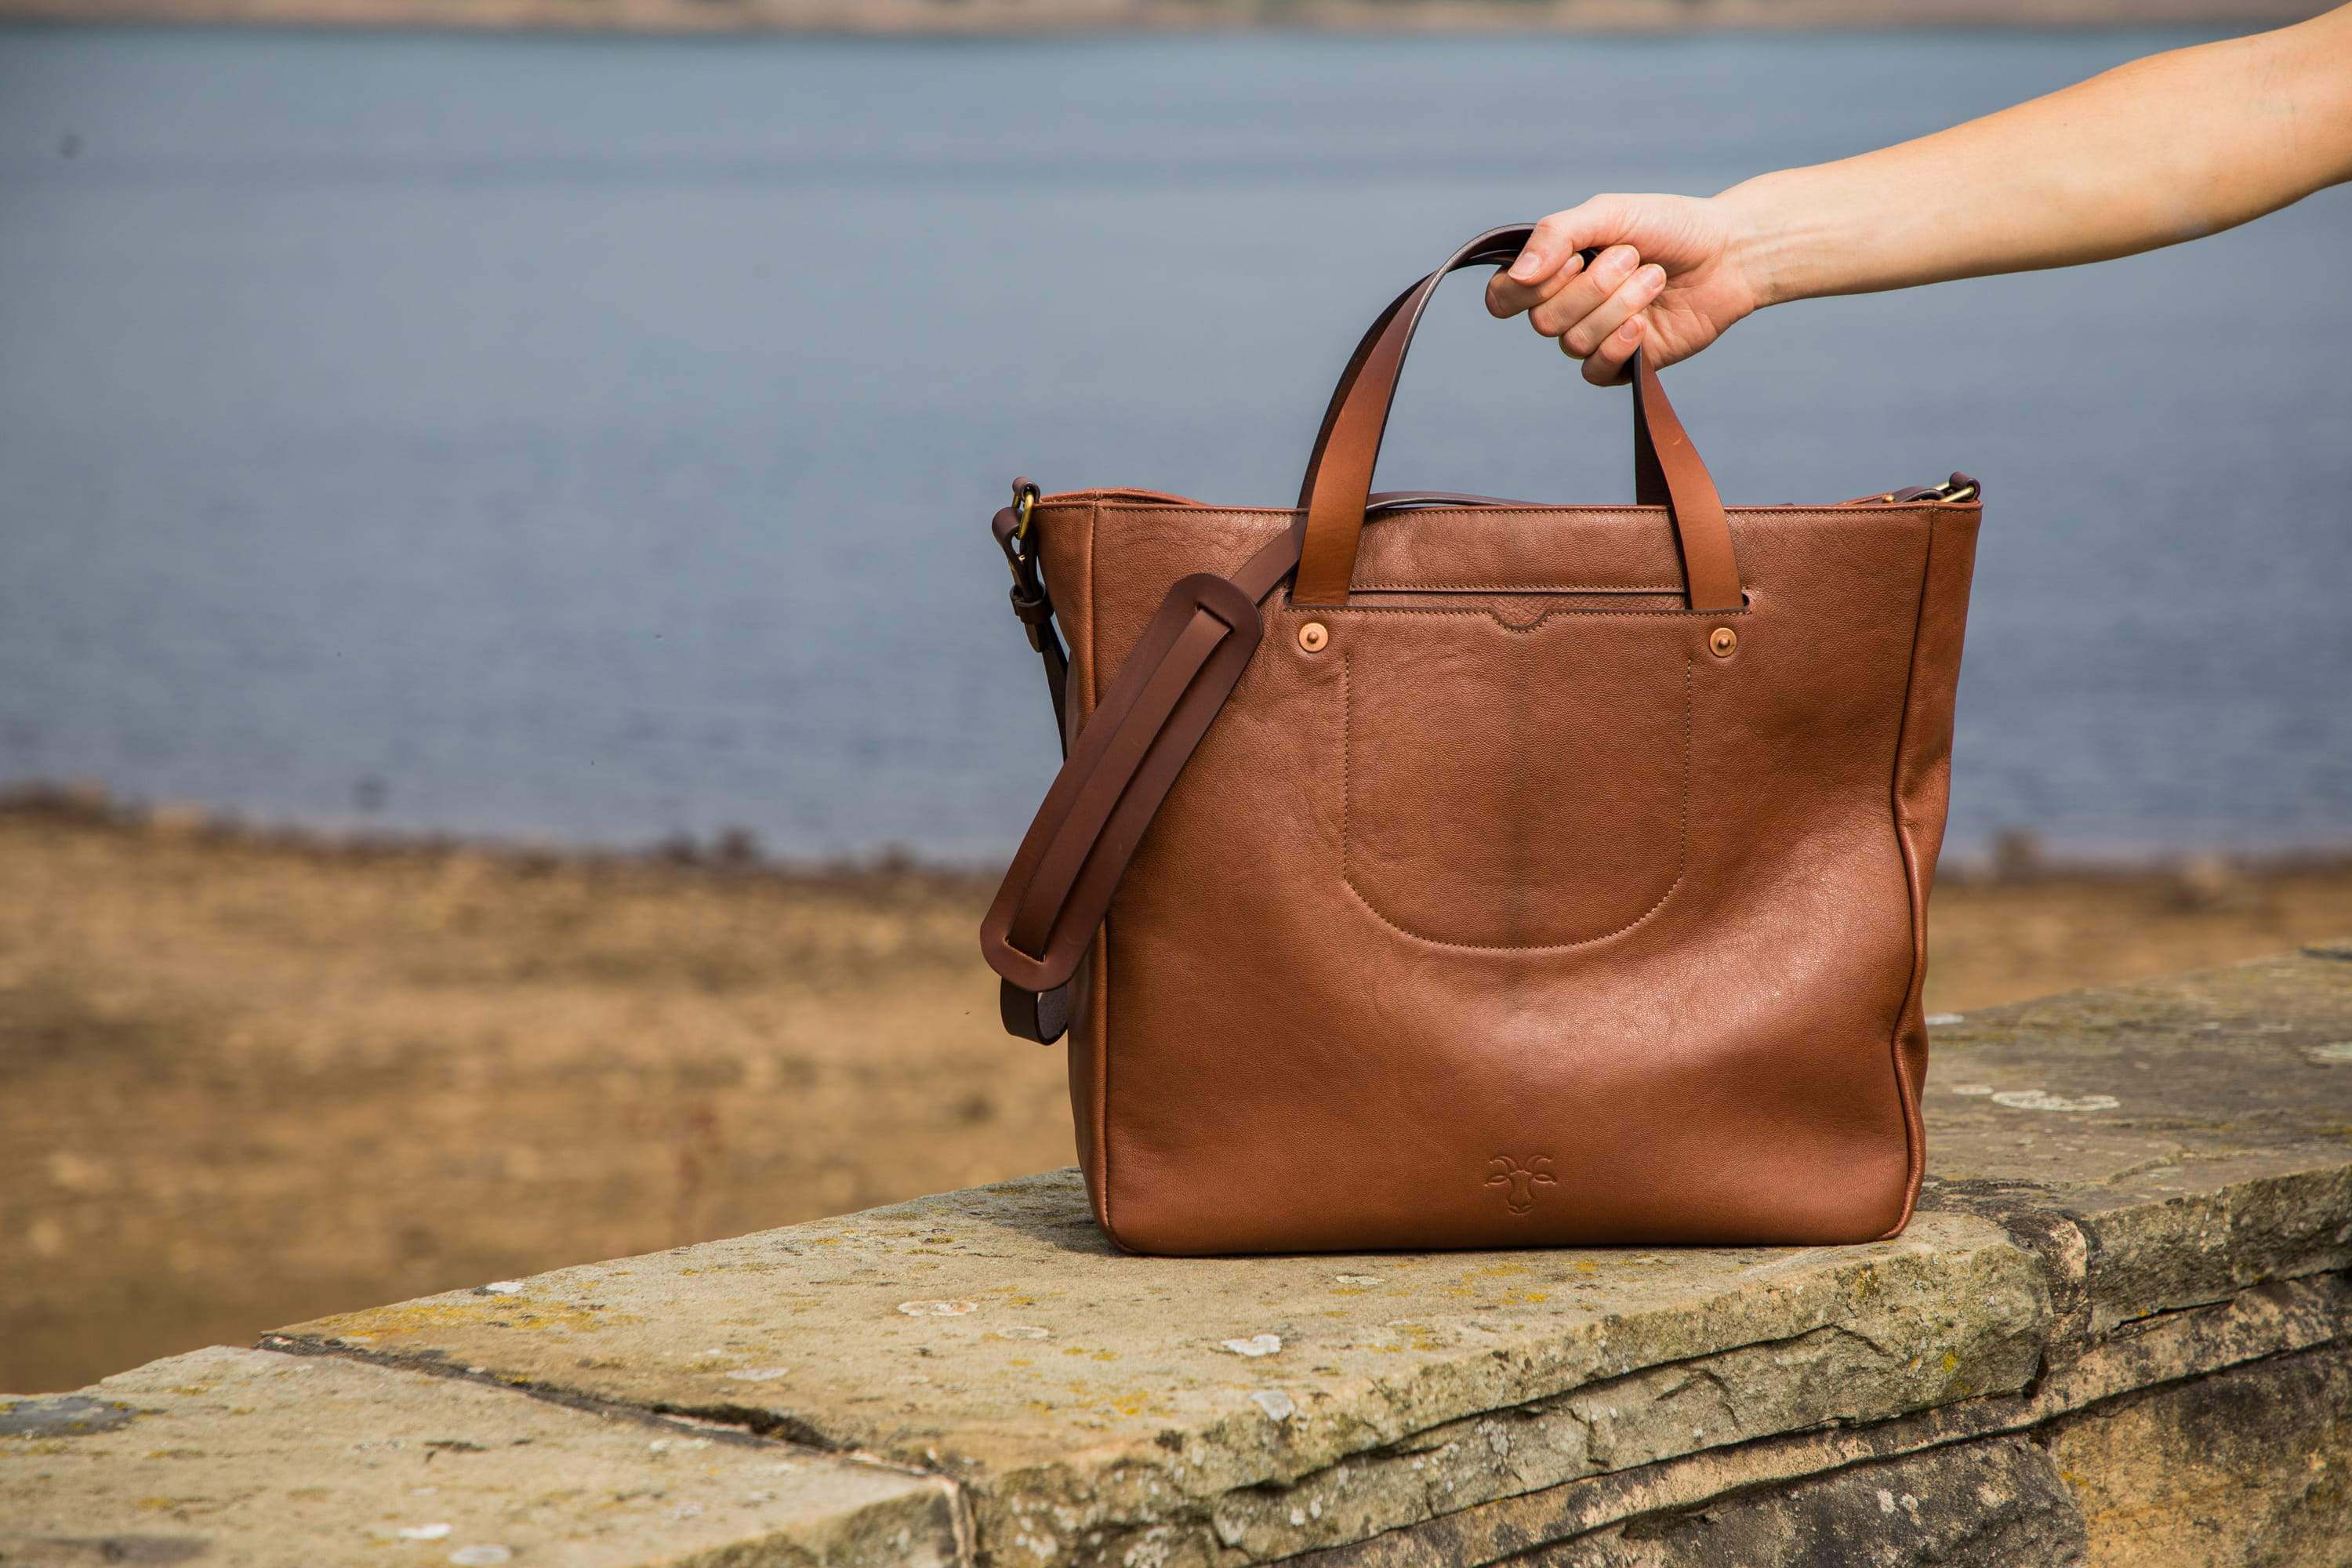 Five things to consider when purchasing handmade leather goods